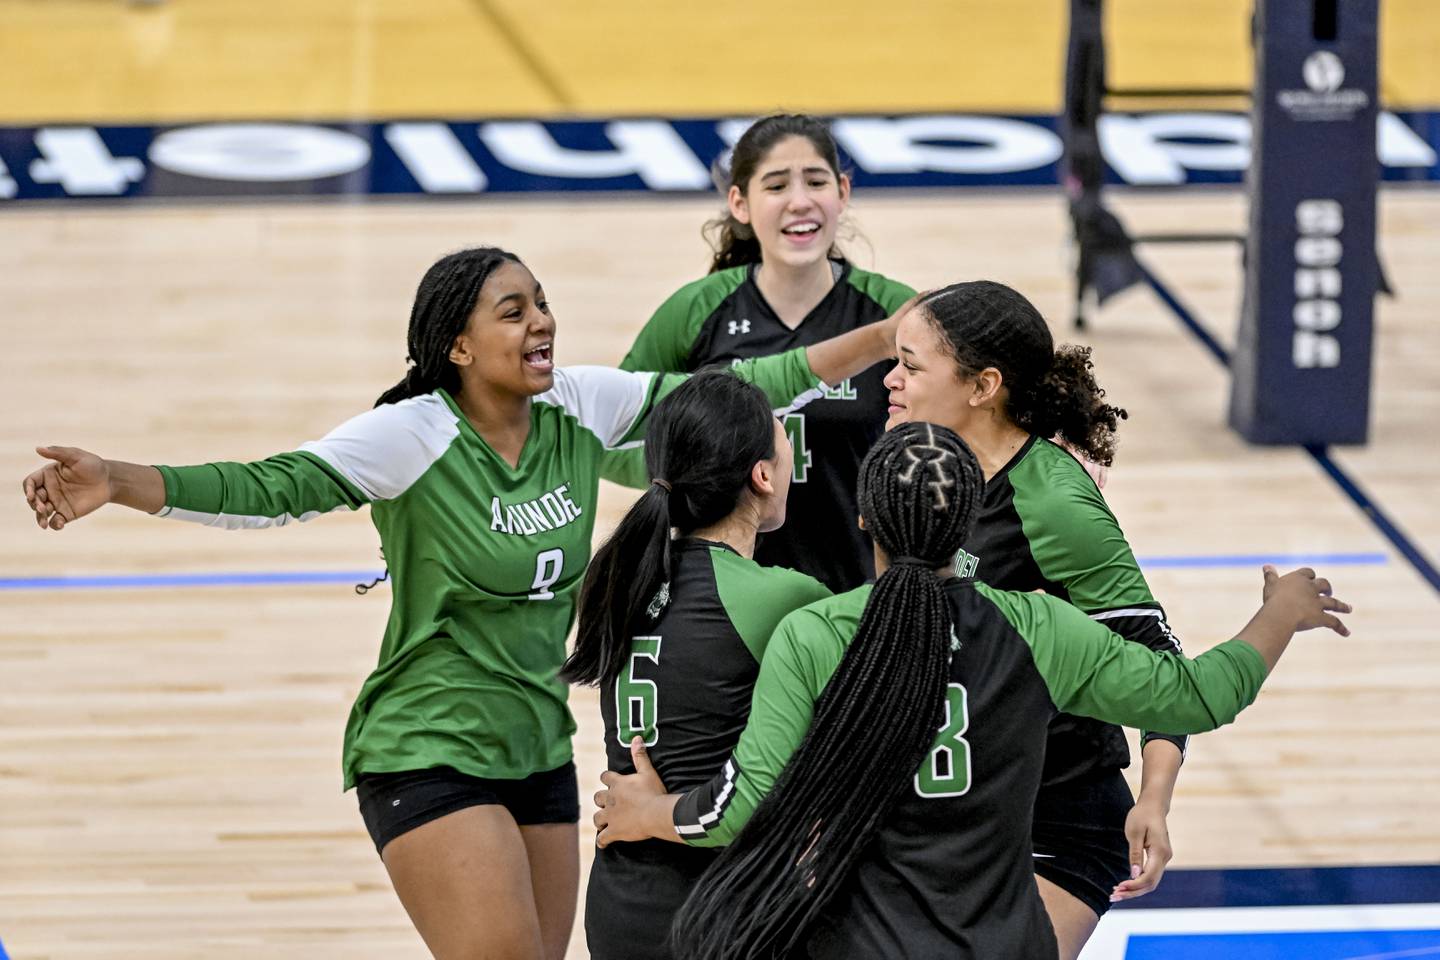 November 17, 2022: Arundel celebrates a point during the MPSSAA 4A Volleyball State Championship matchup between Arundel High School and Urbana High School at the APG Federal Credit Union Arena in Bel Air, Maryland. photo by Scott Serio for the Baltimore Banner